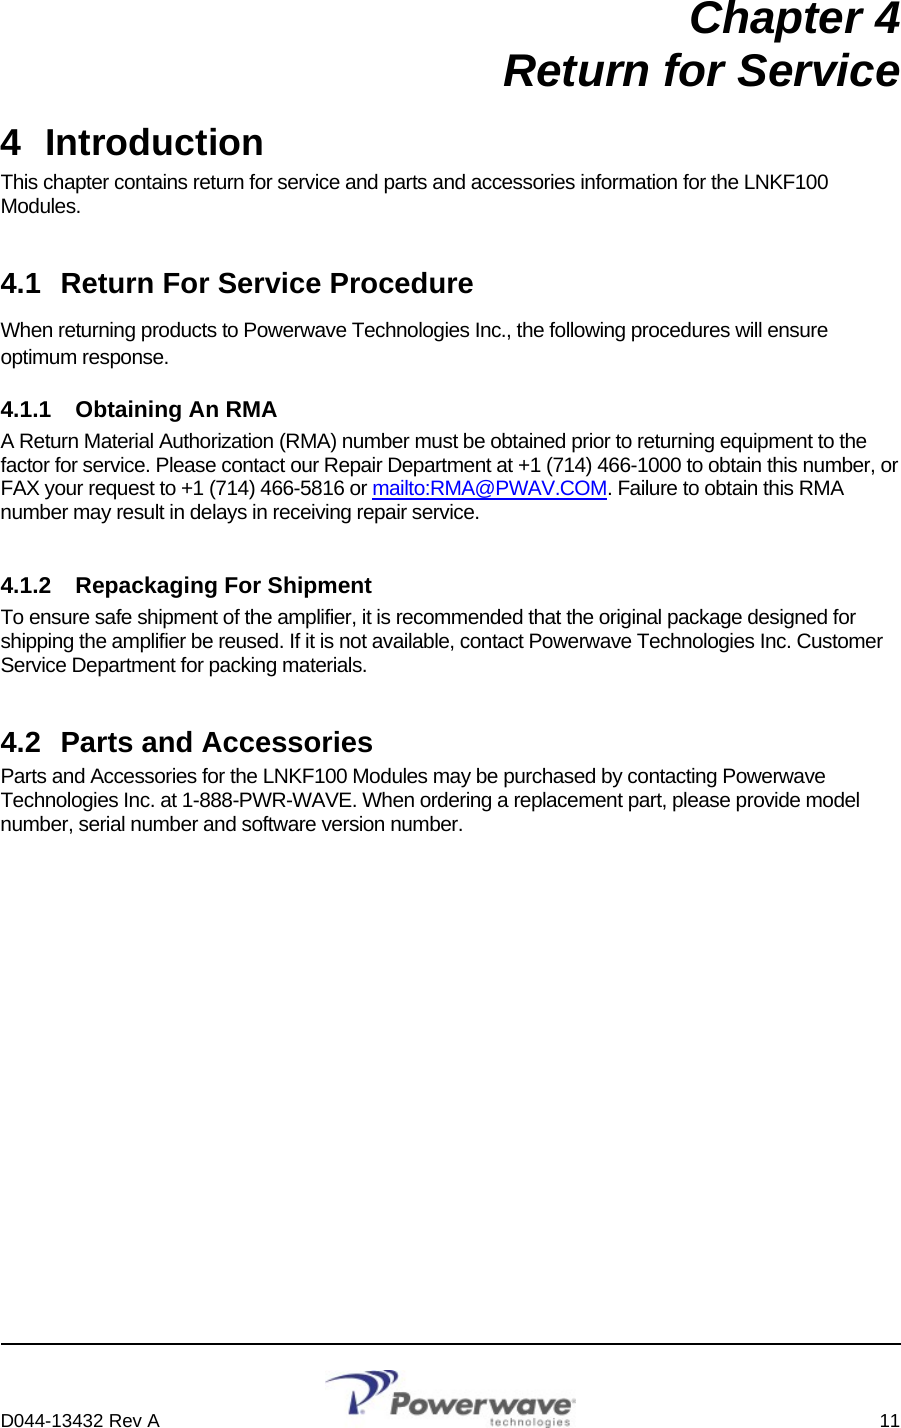     D044-13432 Rev A    11  Chapter 4 Return for Service 4 Introduction This chapter contains return for service and parts and accessories information for the LNKF100 Modules. 4.1  Return For Service Procedure When returning products to Powerwave Technologies Inc., the following procedures will ensure optimum response. 4.1.1  Obtaining An RMA A Return Material Authorization (RMA) number must be obtained prior to returning equipment to the factor for service. Please contact our Repair Department at +1 (714) 466-1000 to obtain this number, or FAX your request to +1 (714) 466-5816 or mailto:RMA@PWAV.COM. Failure to obtain this RMA number may result in delays in receiving repair service. 4.1.2  Repackaging For Shipment To ensure safe shipment of the amplifier, it is recommended that the original package designed for shipping the amplifier be reused. If it is not available, contact Powerwave Technologies Inc. Customer Service Department for packing materials. 4.2  Parts and Accessories Parts and Accessories for the LNKF100 Modules may be purchased by contacting Powerwave Technologies Inc. at 1-888-PWR-WAVE. When ordering a replacement part, please provide model number, serial number and software version number. 